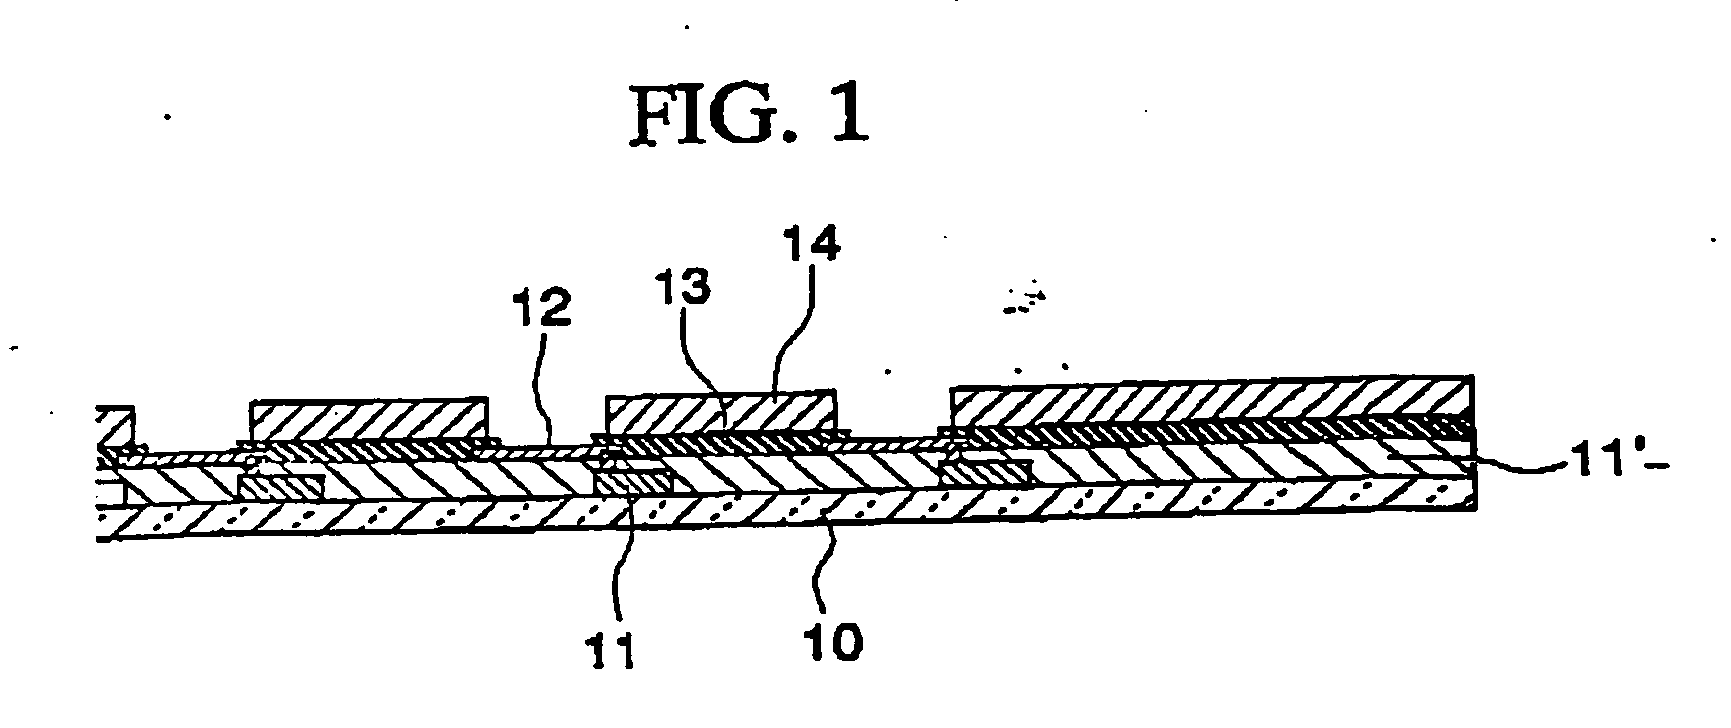 Organic electroluminescent device, manufacturing method therefor, and electronic devices therewith